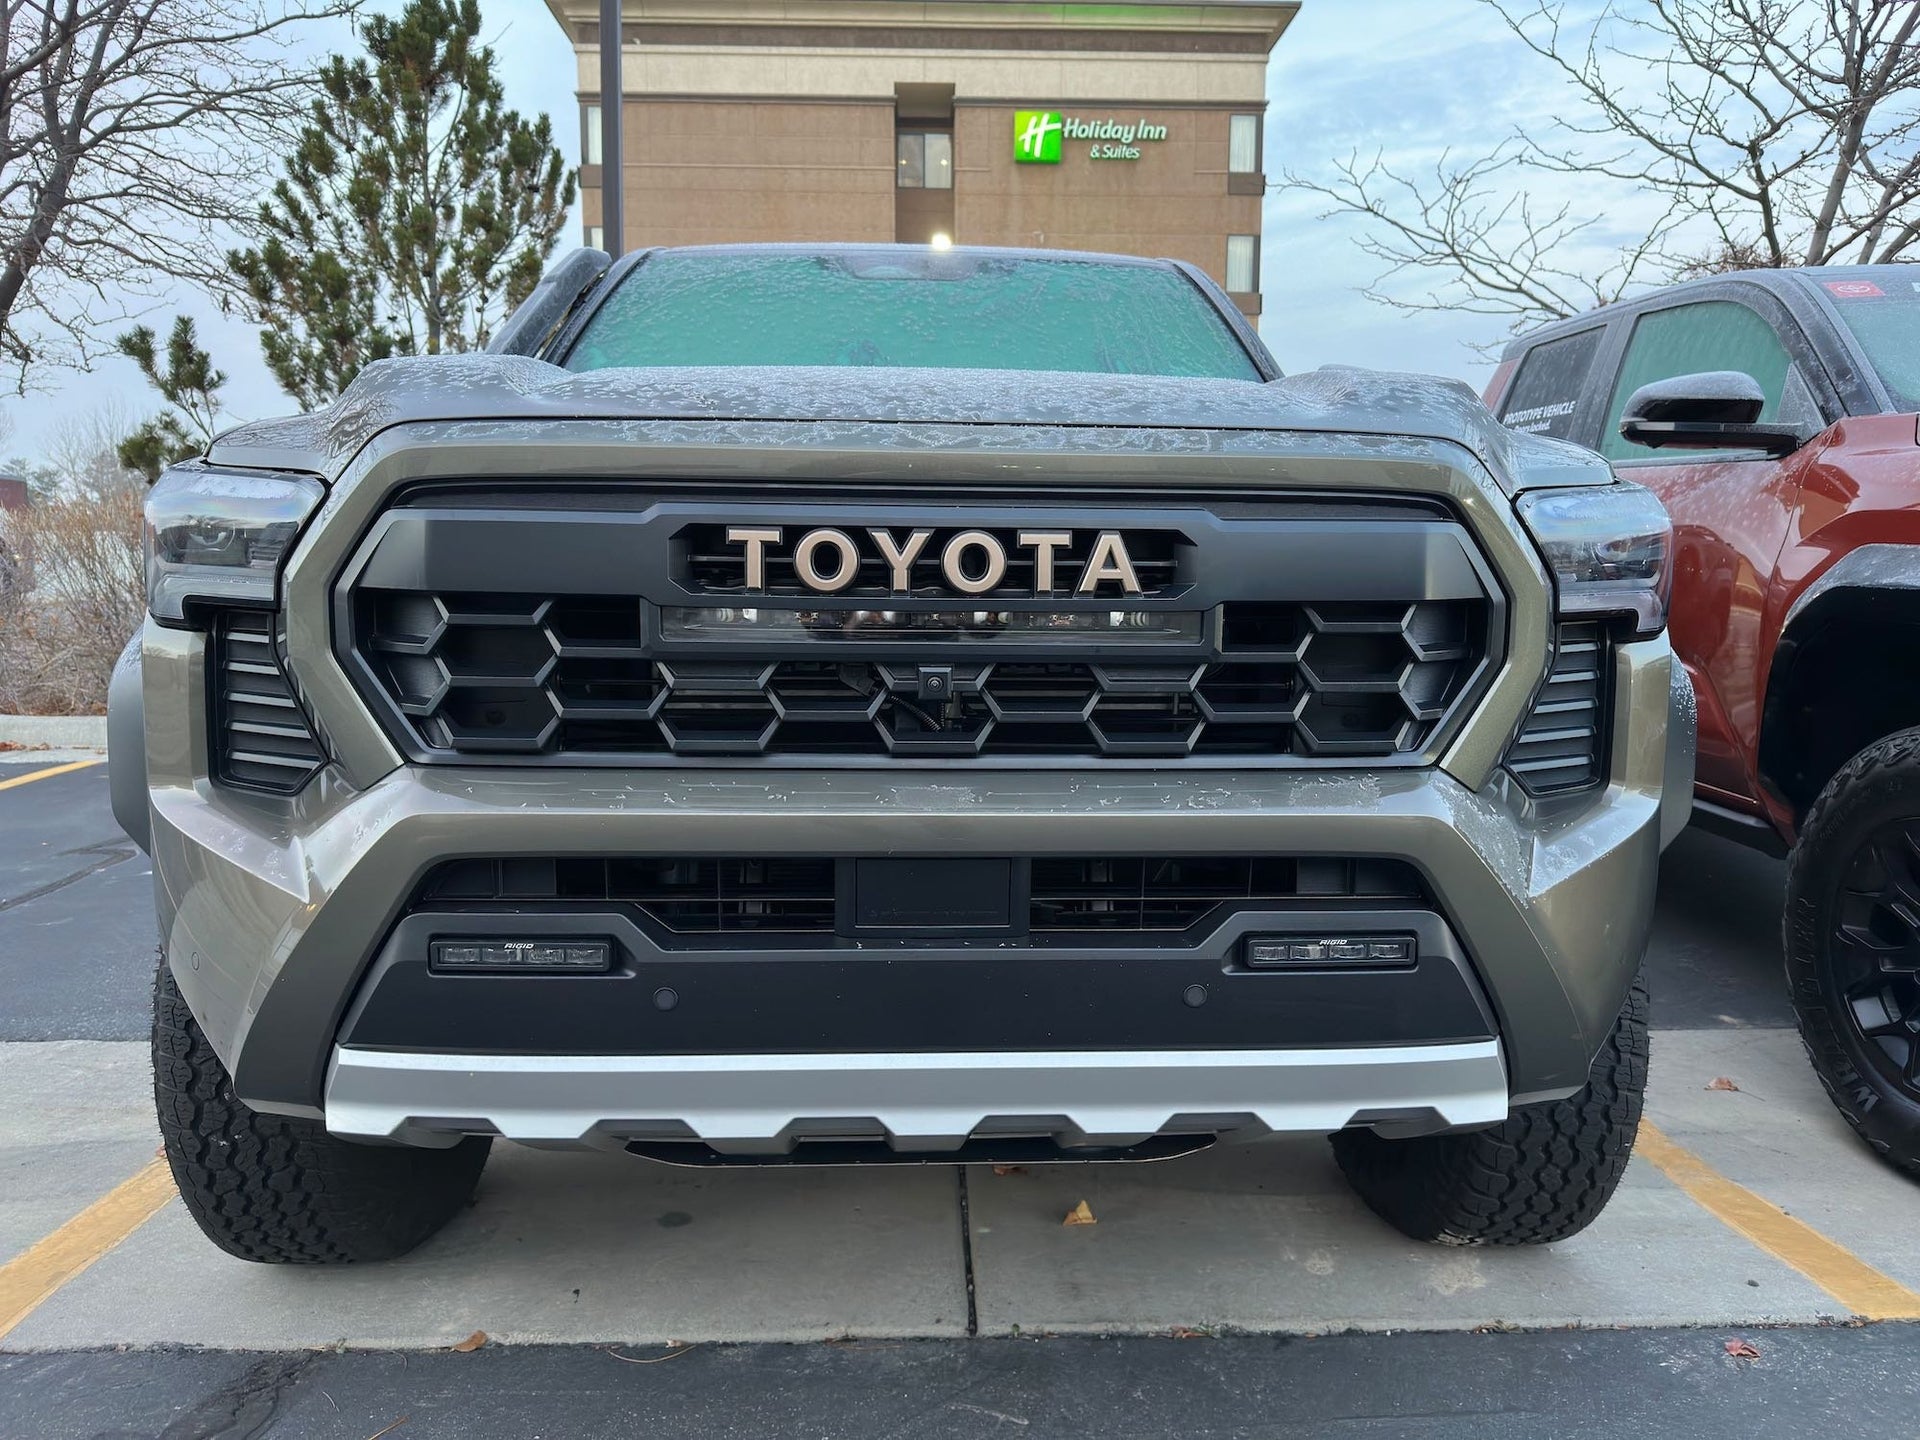 2024 Tacoma Official BRONZE OXIDE 2024 Tacoma Thread (4th Gen) 2024 Tacoma TRD Pro Terra and Trailhunter Bronze oxide side by side 8